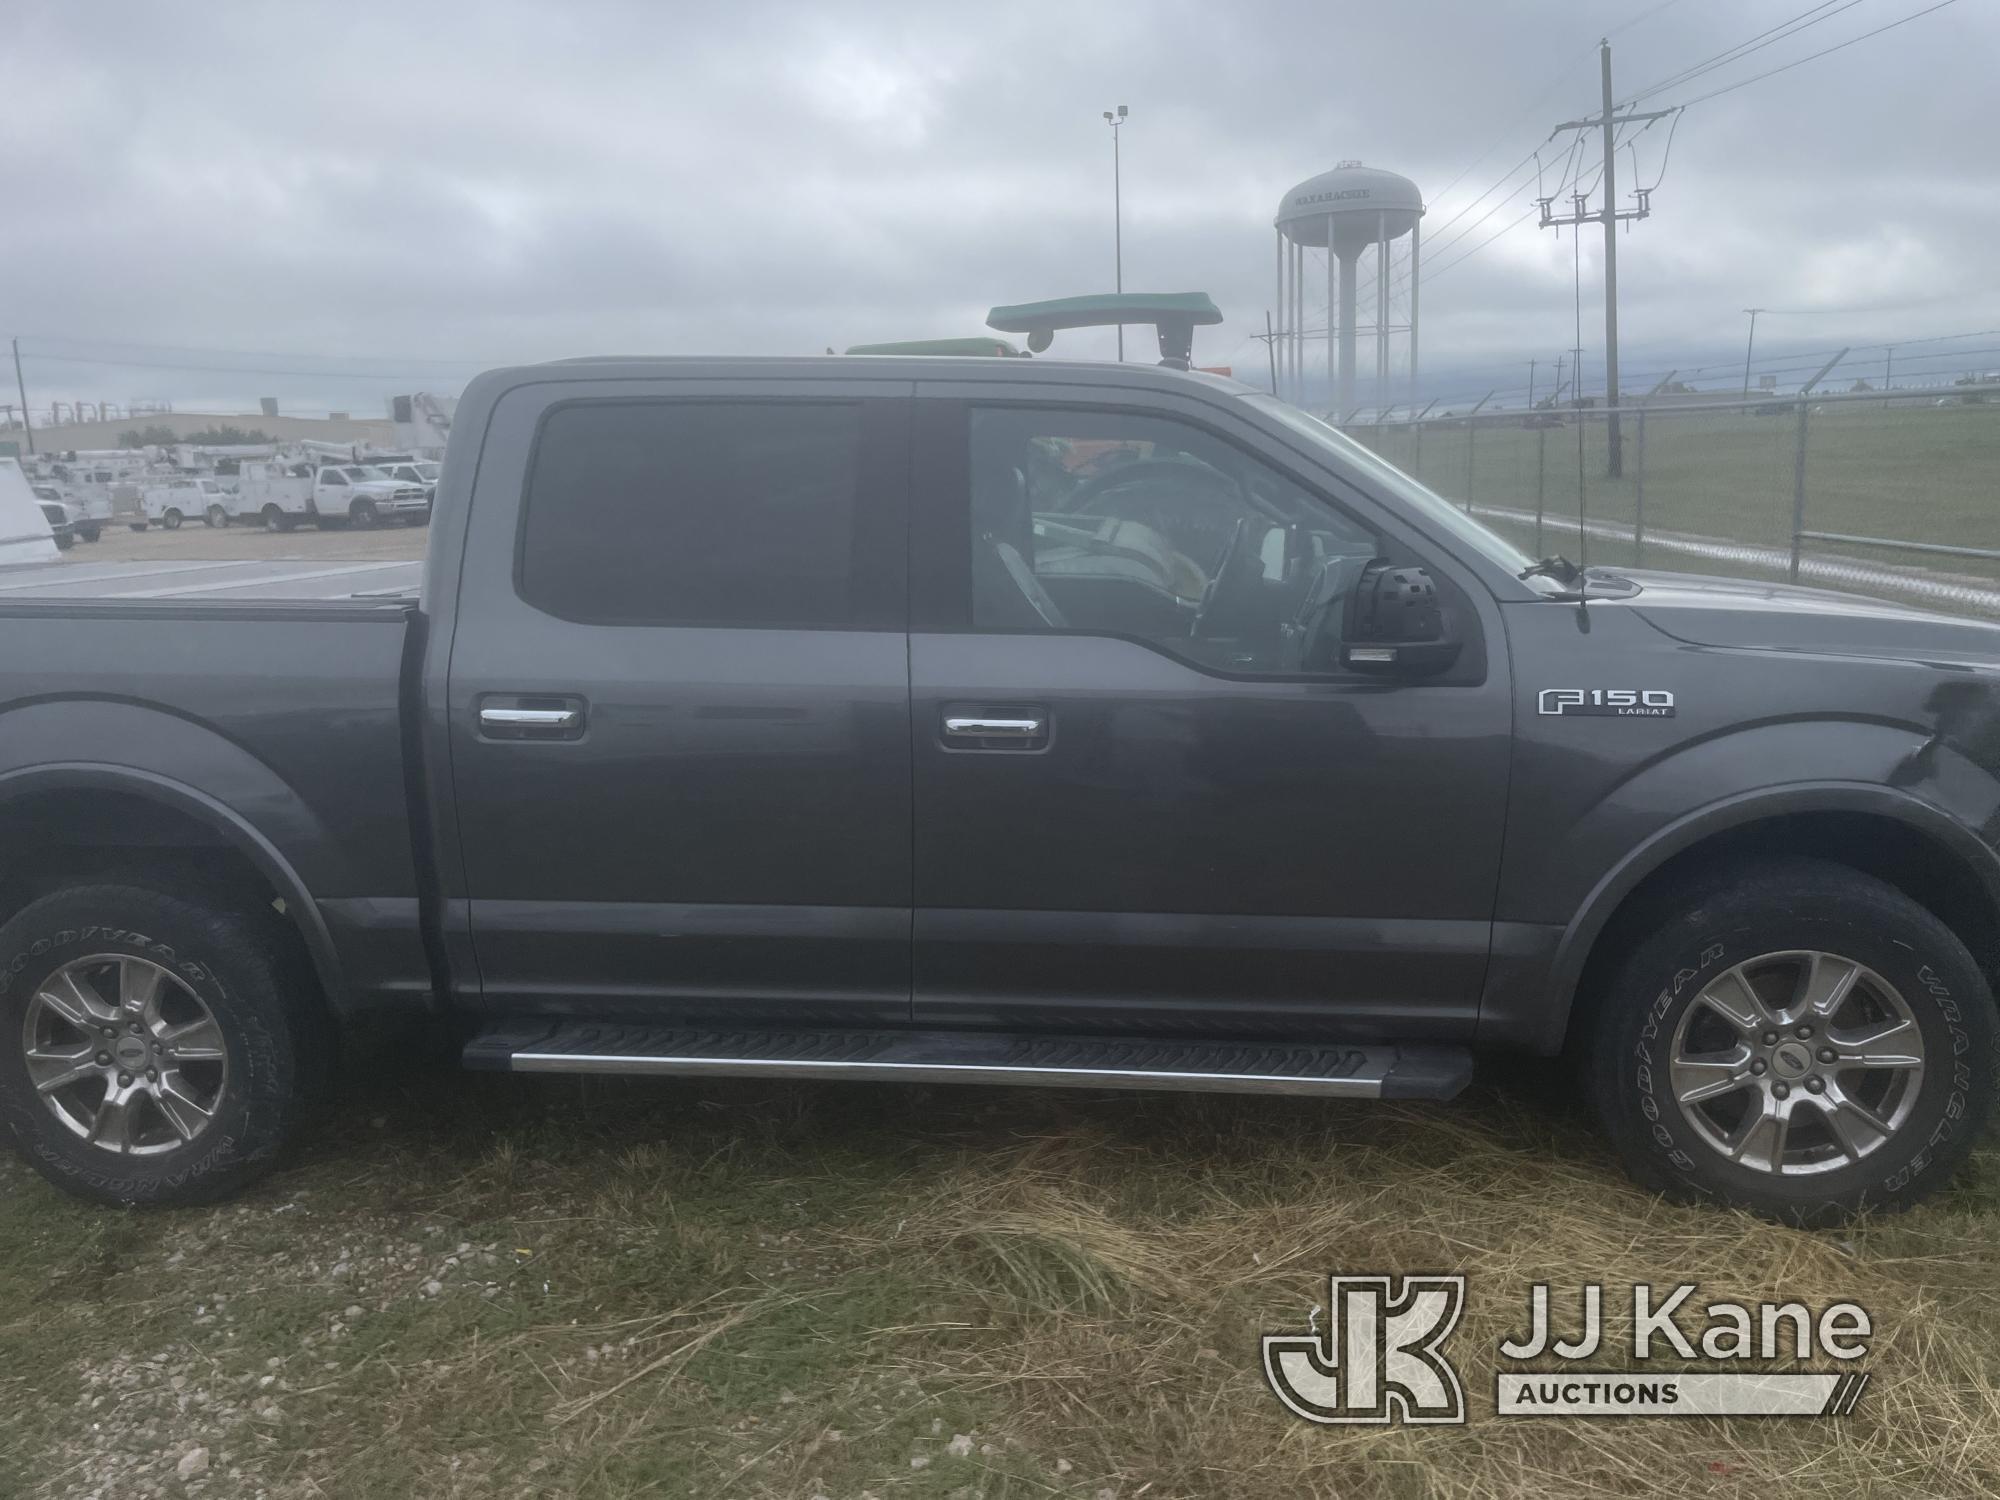 (Waxahachie, TX) 2017 Ford F150 Crew-Cab Pickup Truck NO KEY, Security Lock Preventing Key From Bein